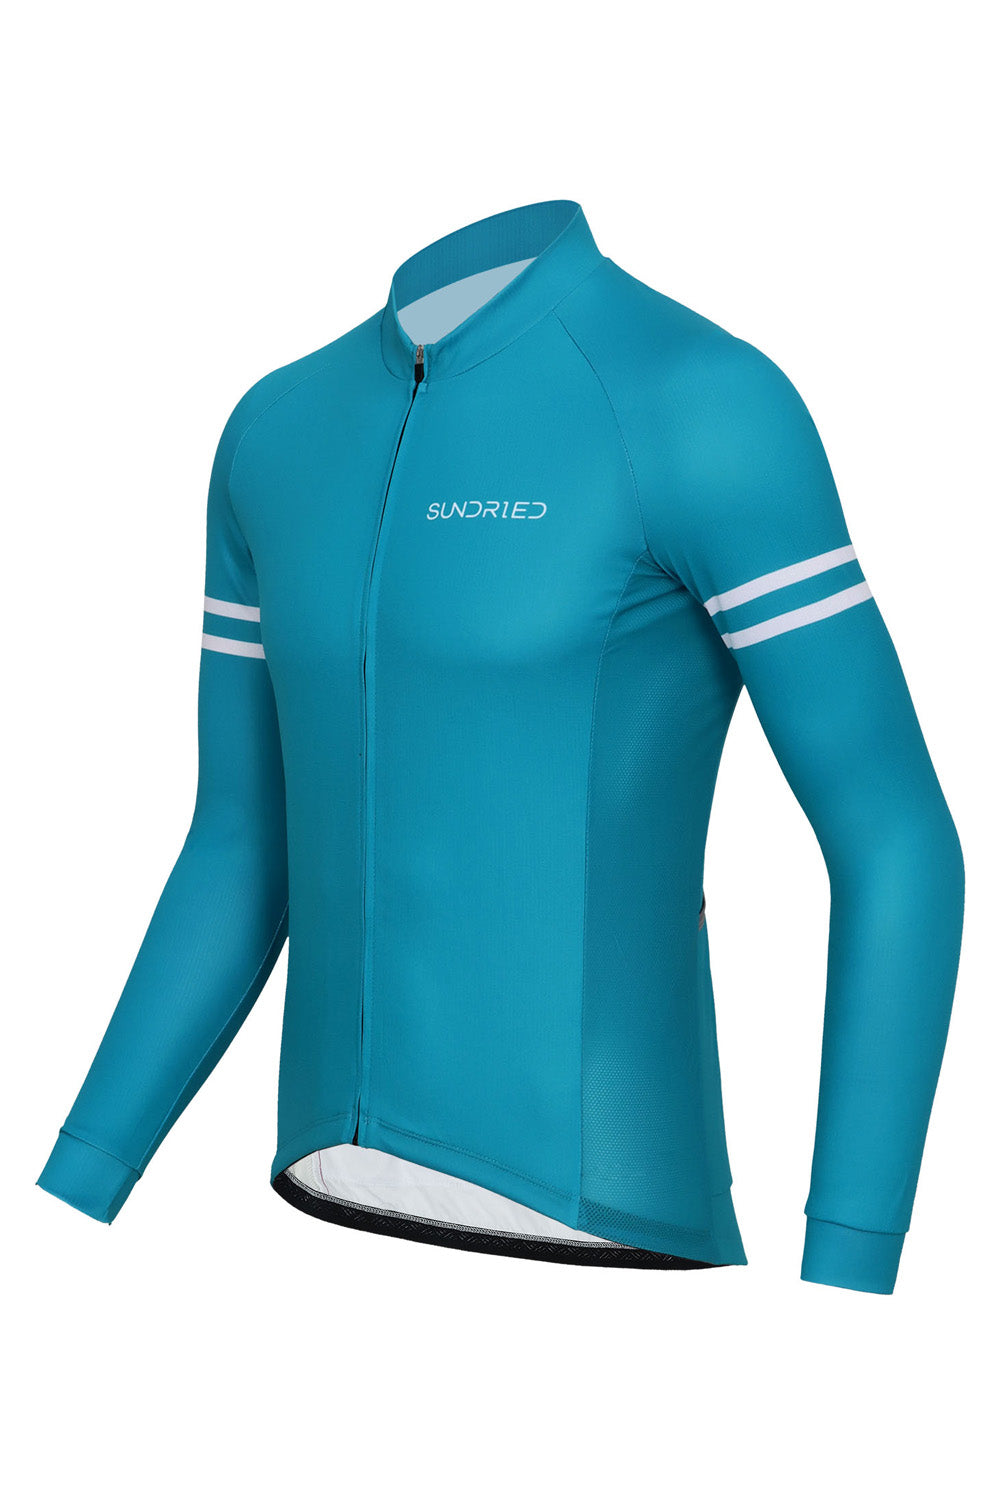 Sundried Turquoise Men's Long Sleeve Cycle Jersey Long Sleeve Jersey Activewear